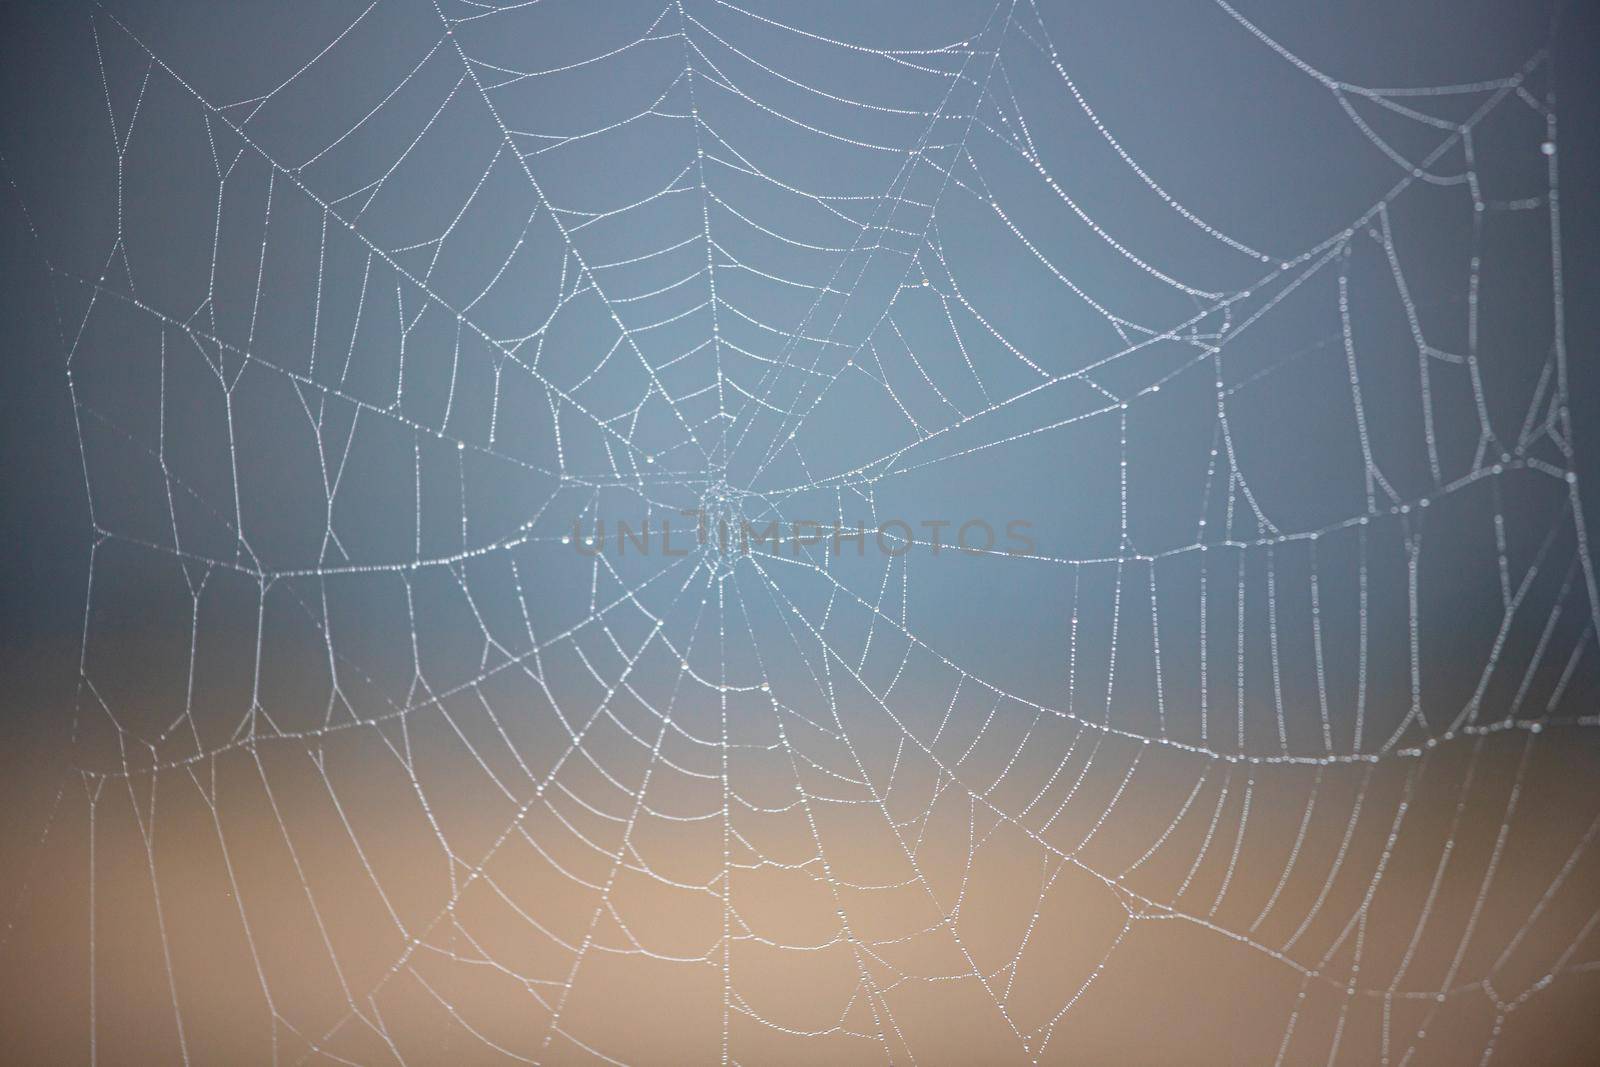 Web design in nature, created by insects on a nice blurry background. by bySergPo